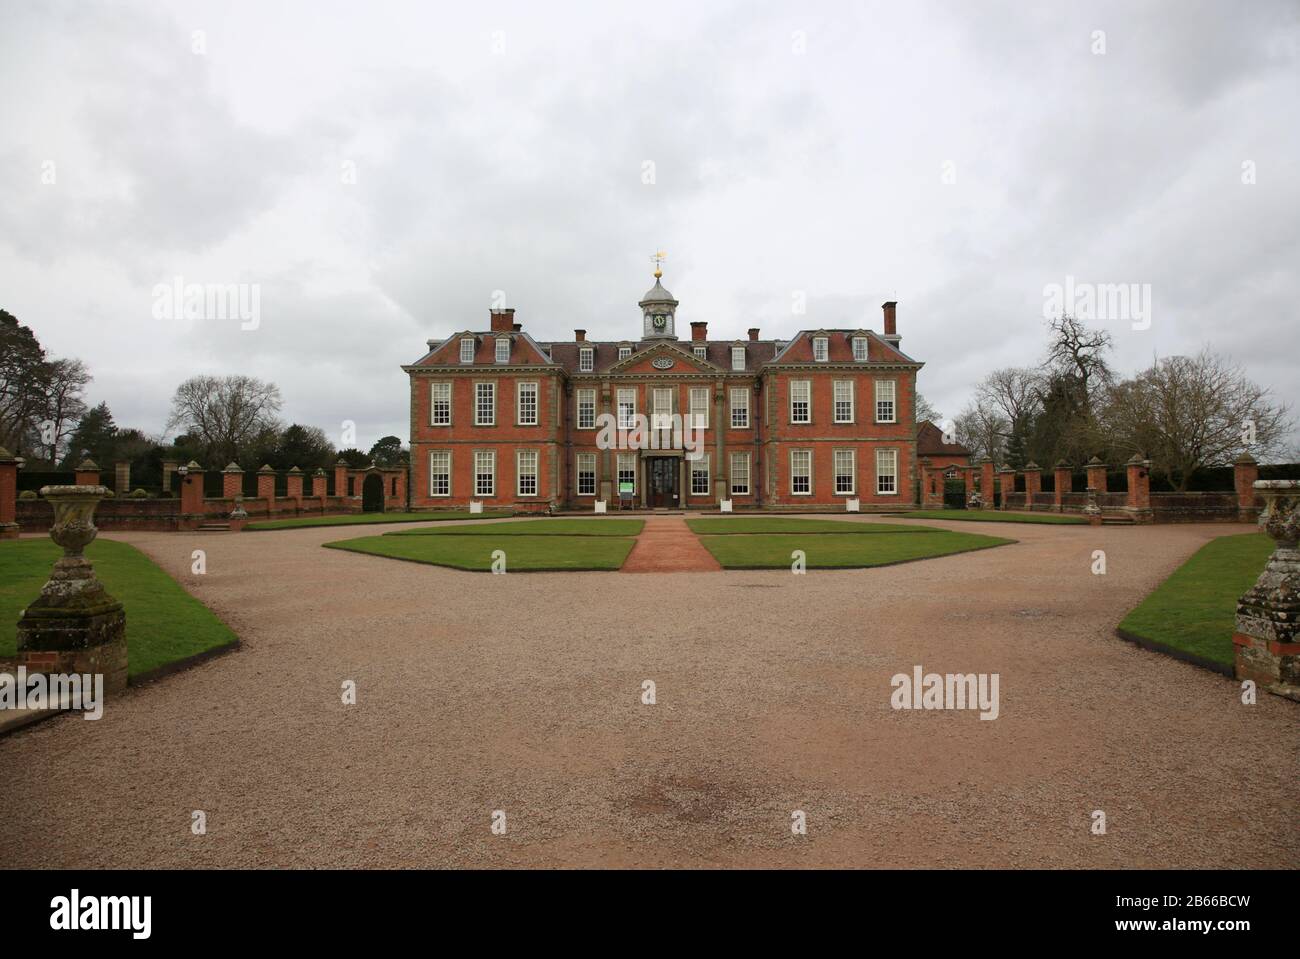 Front view of Hanbury hall, Worcestershire, England, UK. Stock Photo